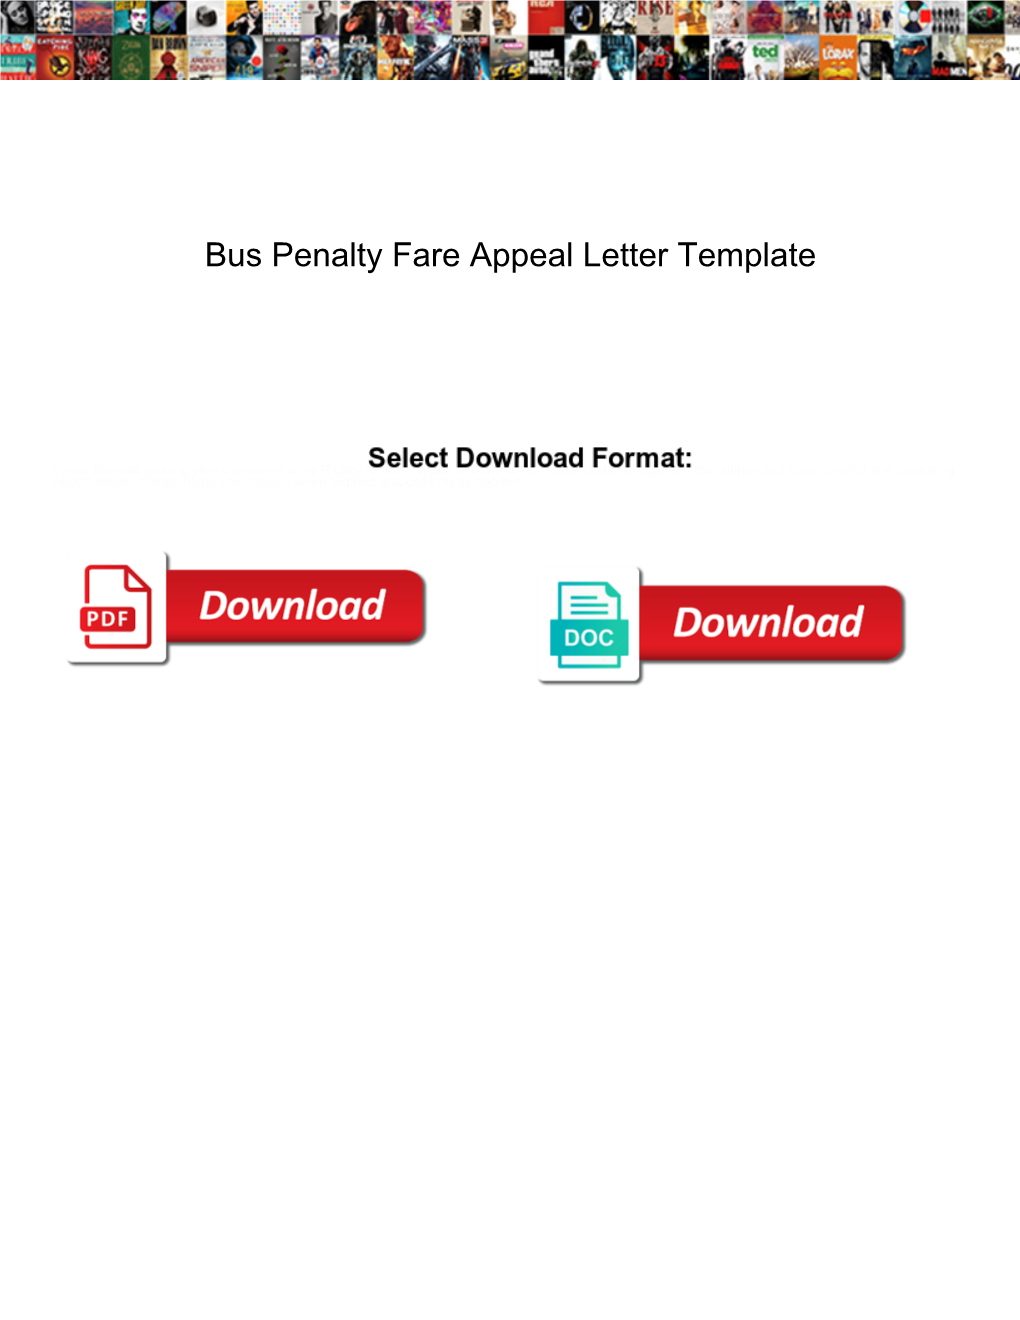 Bus Penalty Fare Appeal Letter Template